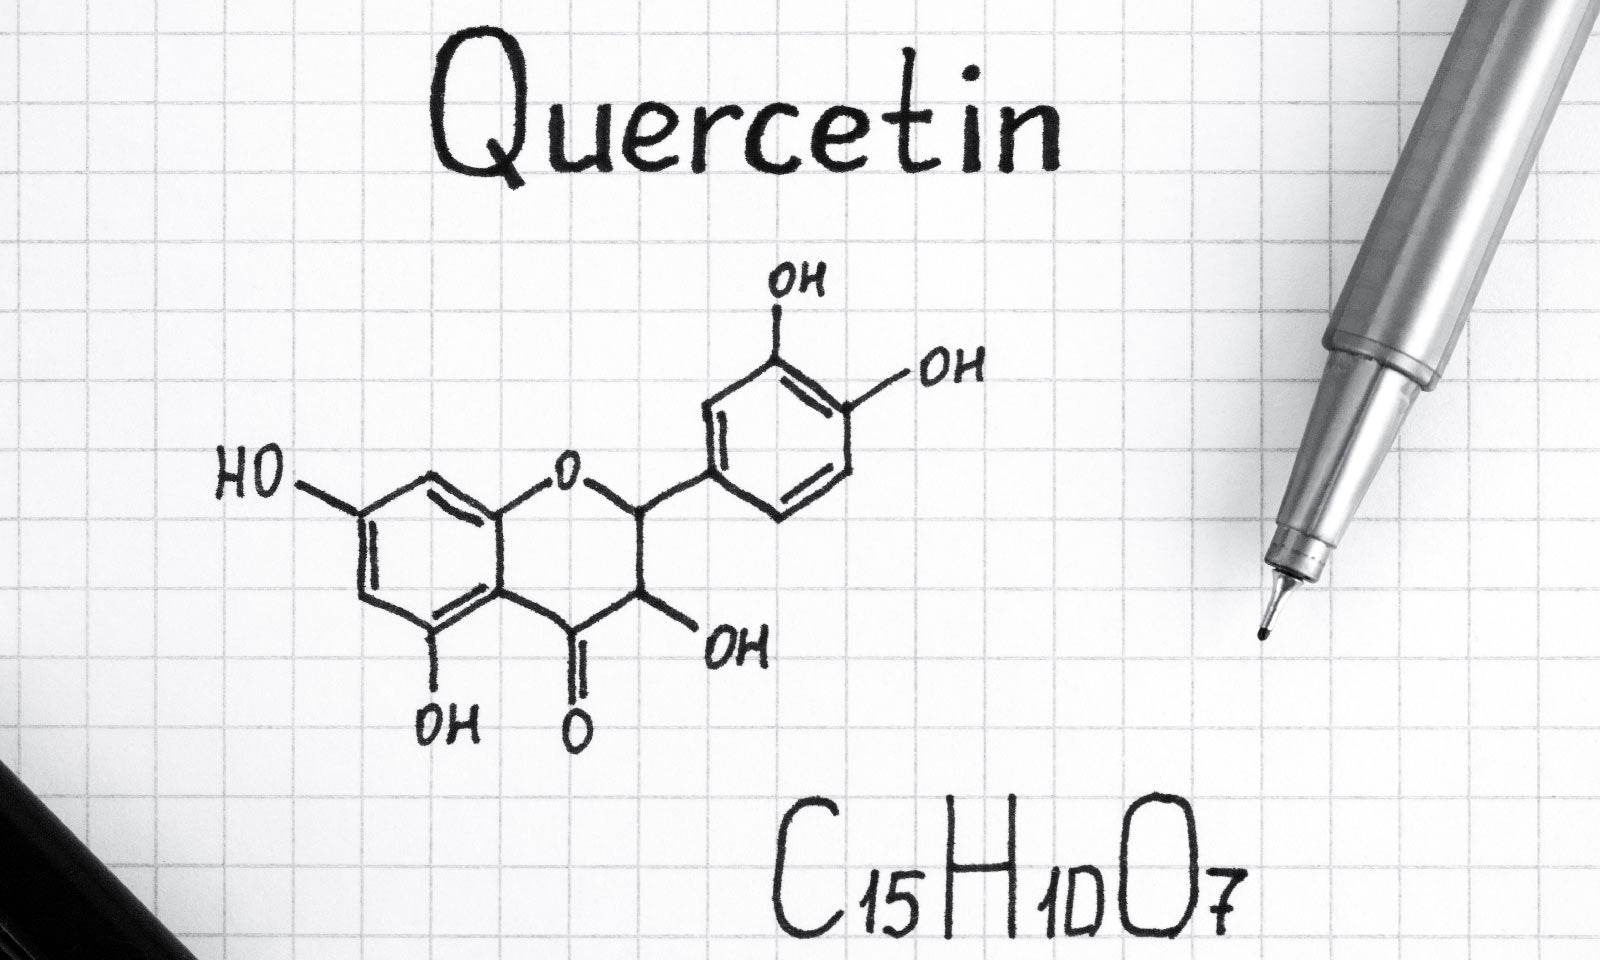 Quercetin - Everything You Need to Know